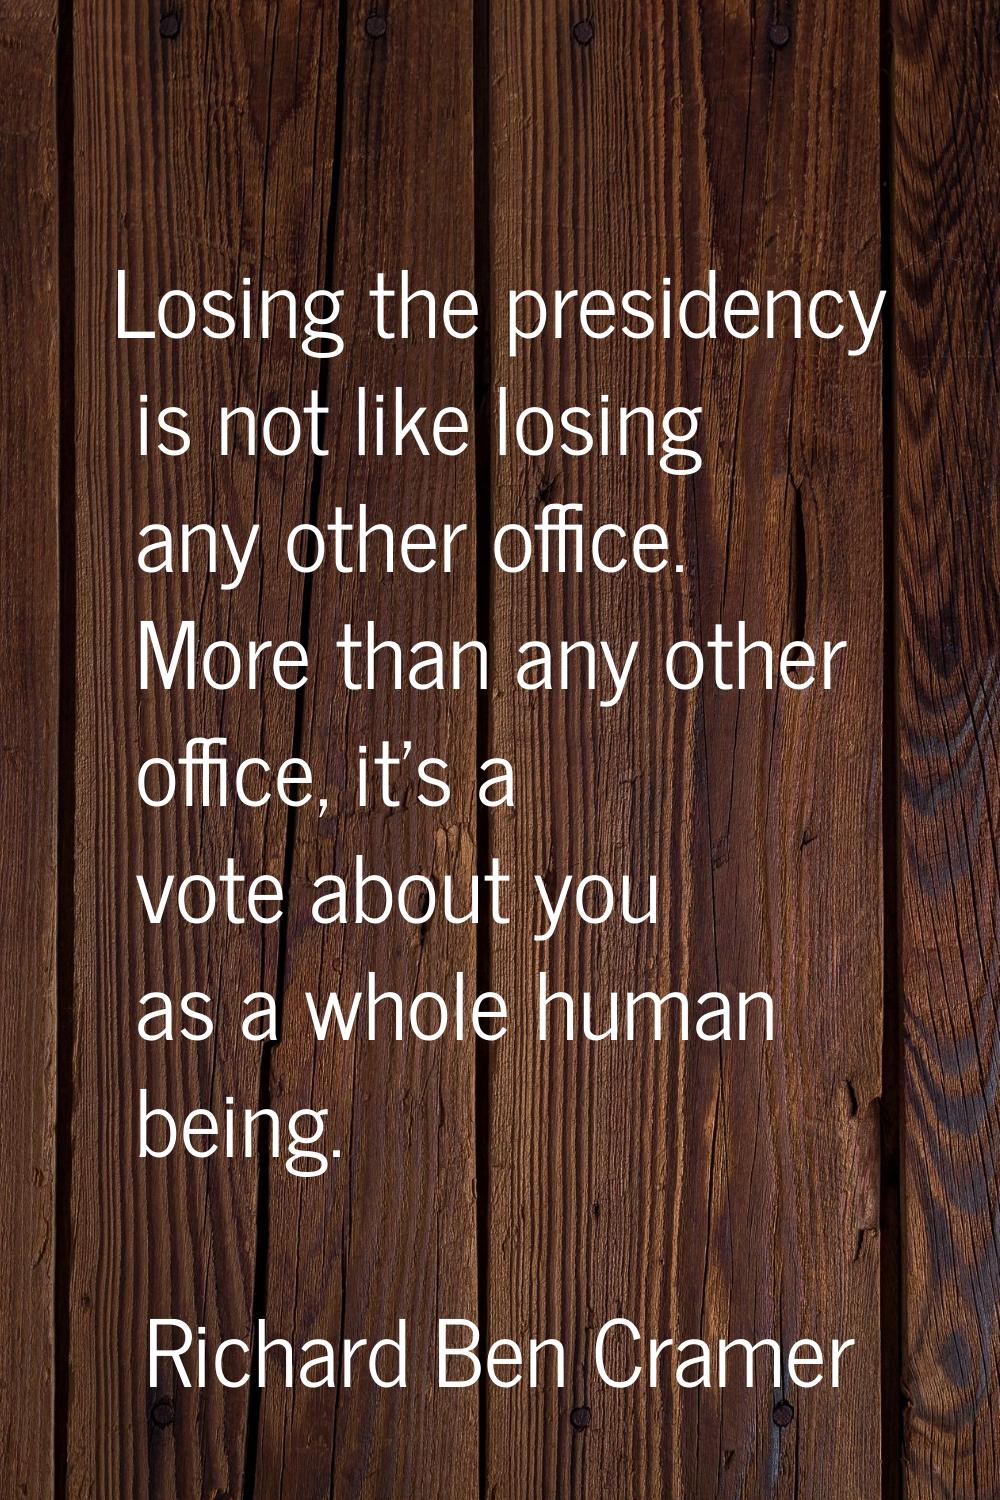 Losing the presidency is not like losing any other office. More than any other office, it's a vote 